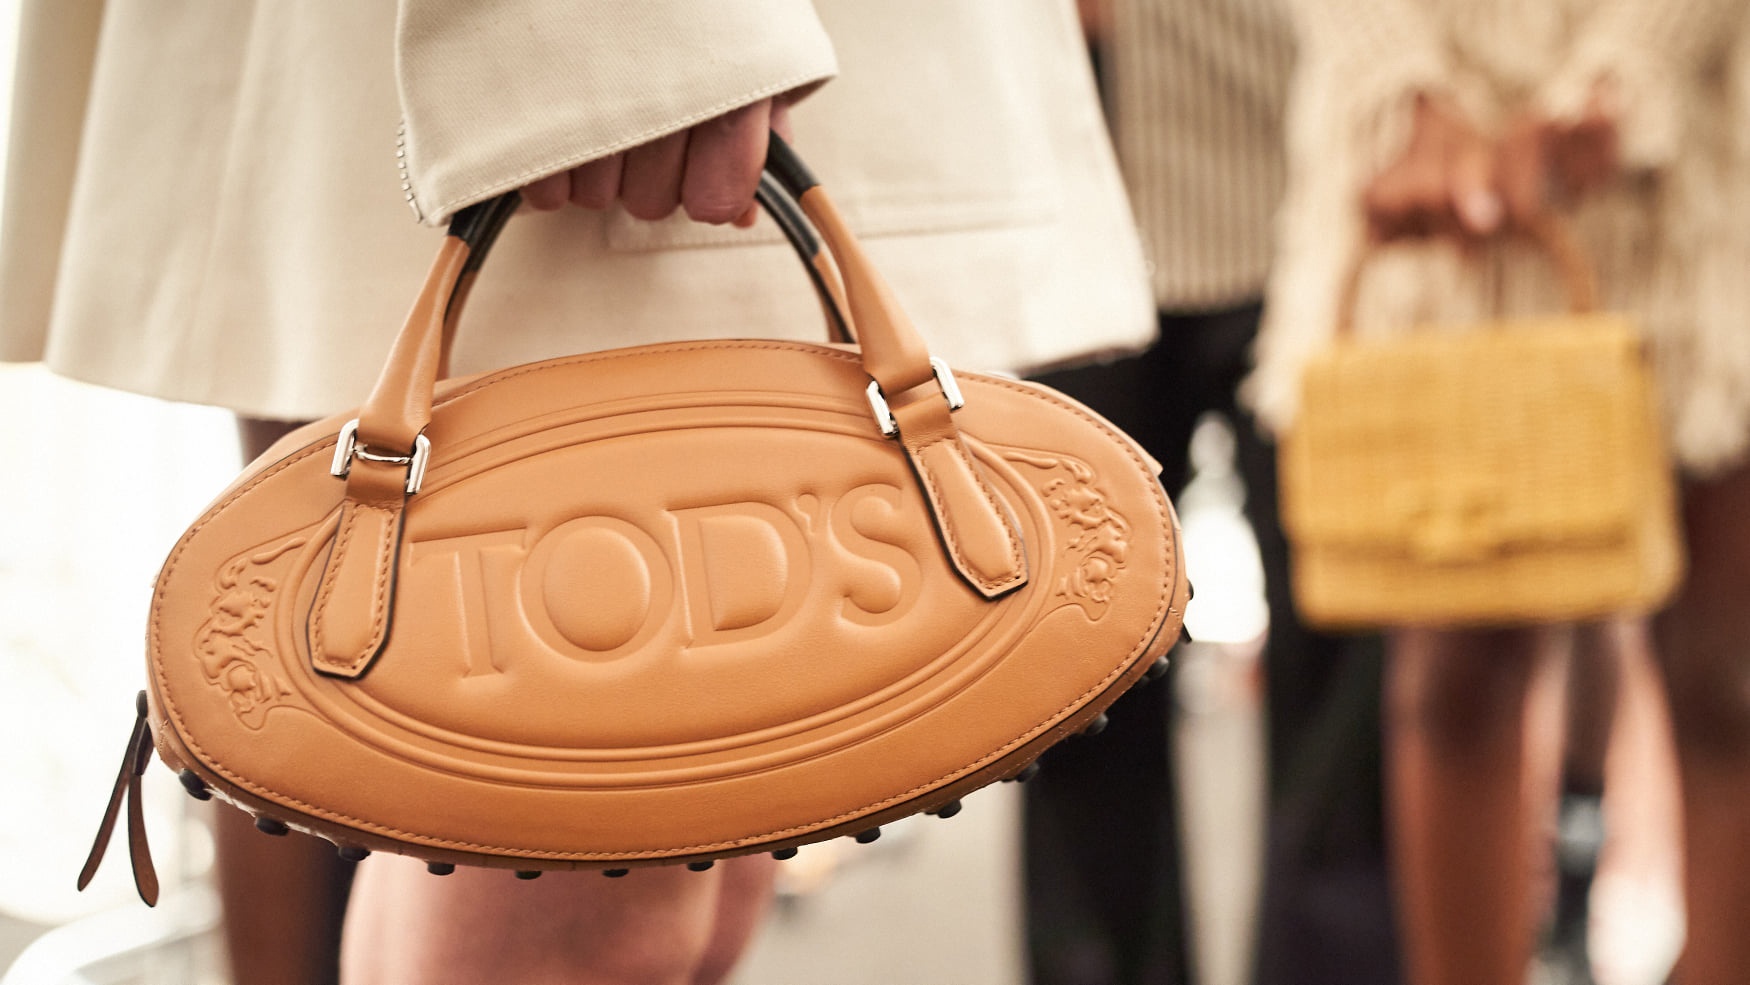 Alibaba and JD.com are battling for luxury shopper attention at this year’s Double 11 shopping extravaganza. Which brands will benefit?  Photo: Tod's